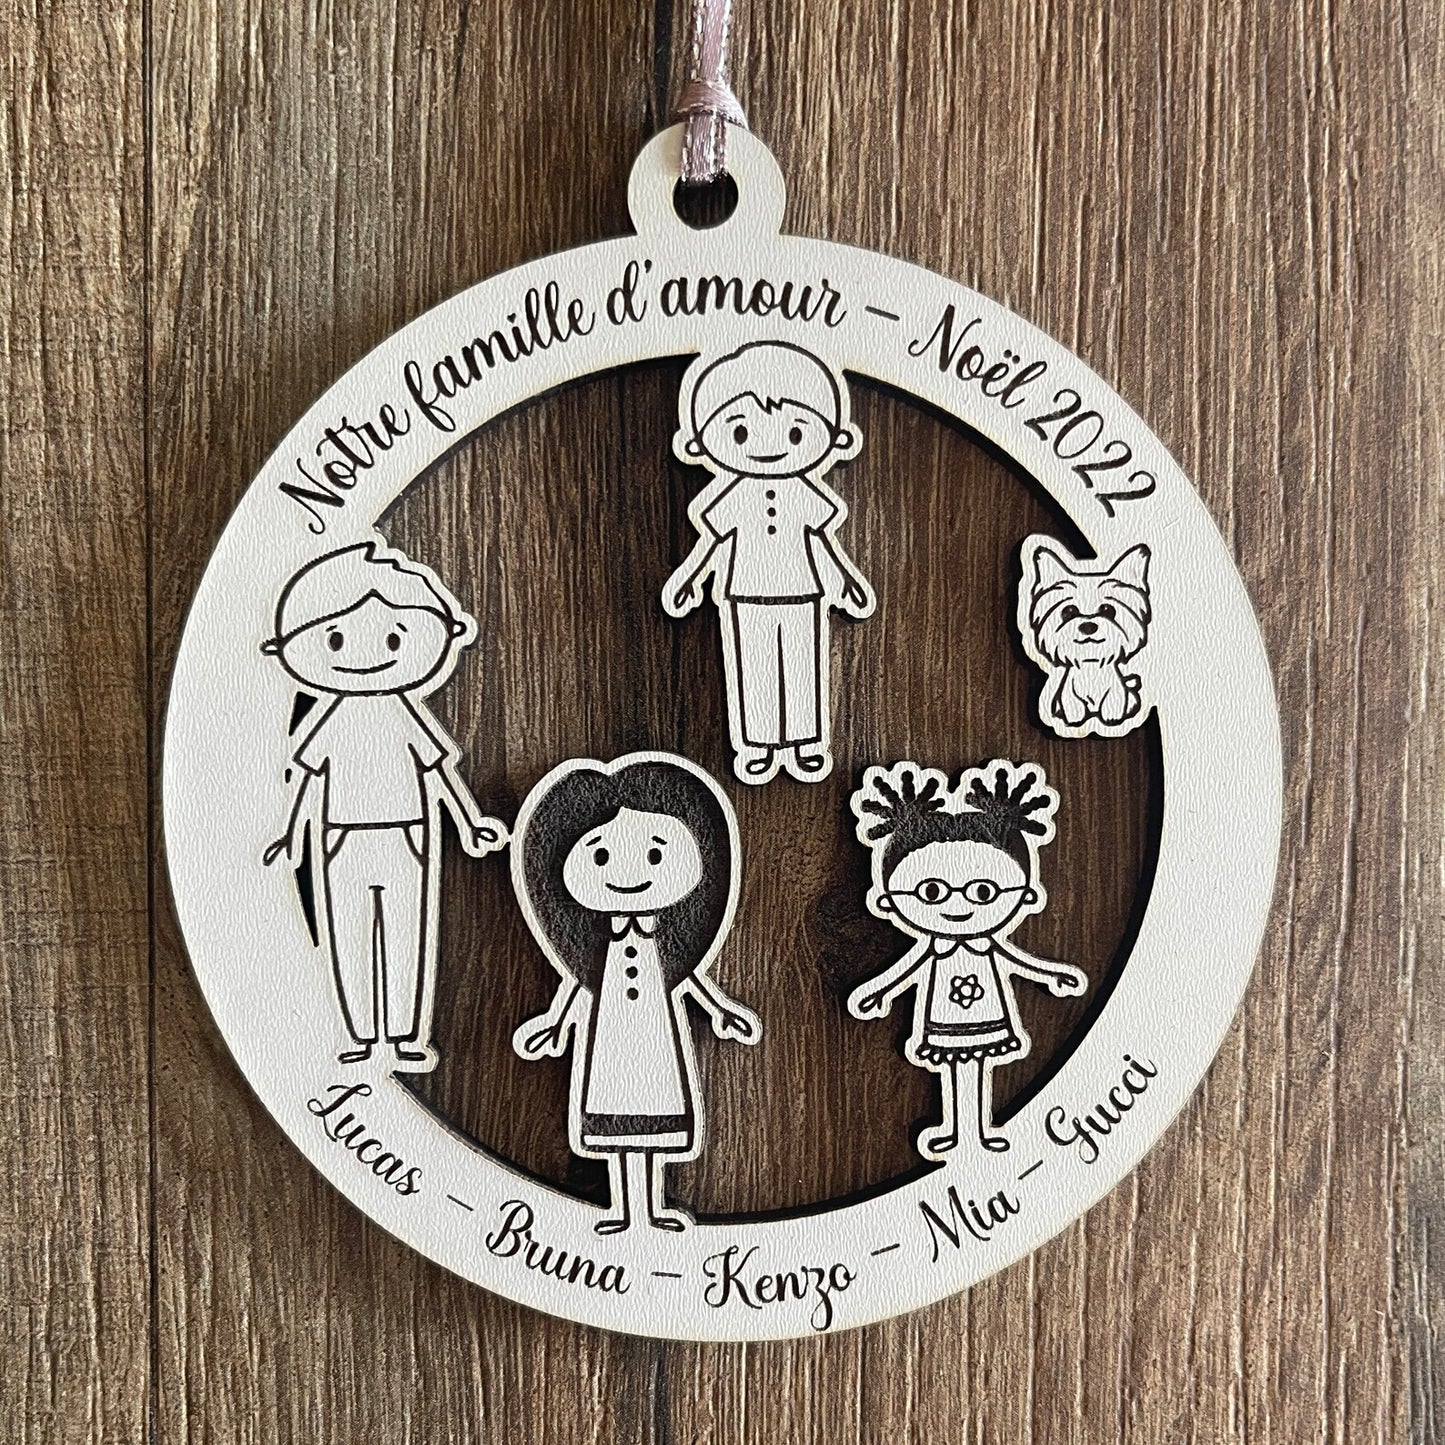 Personalized wooden family Christmas ball